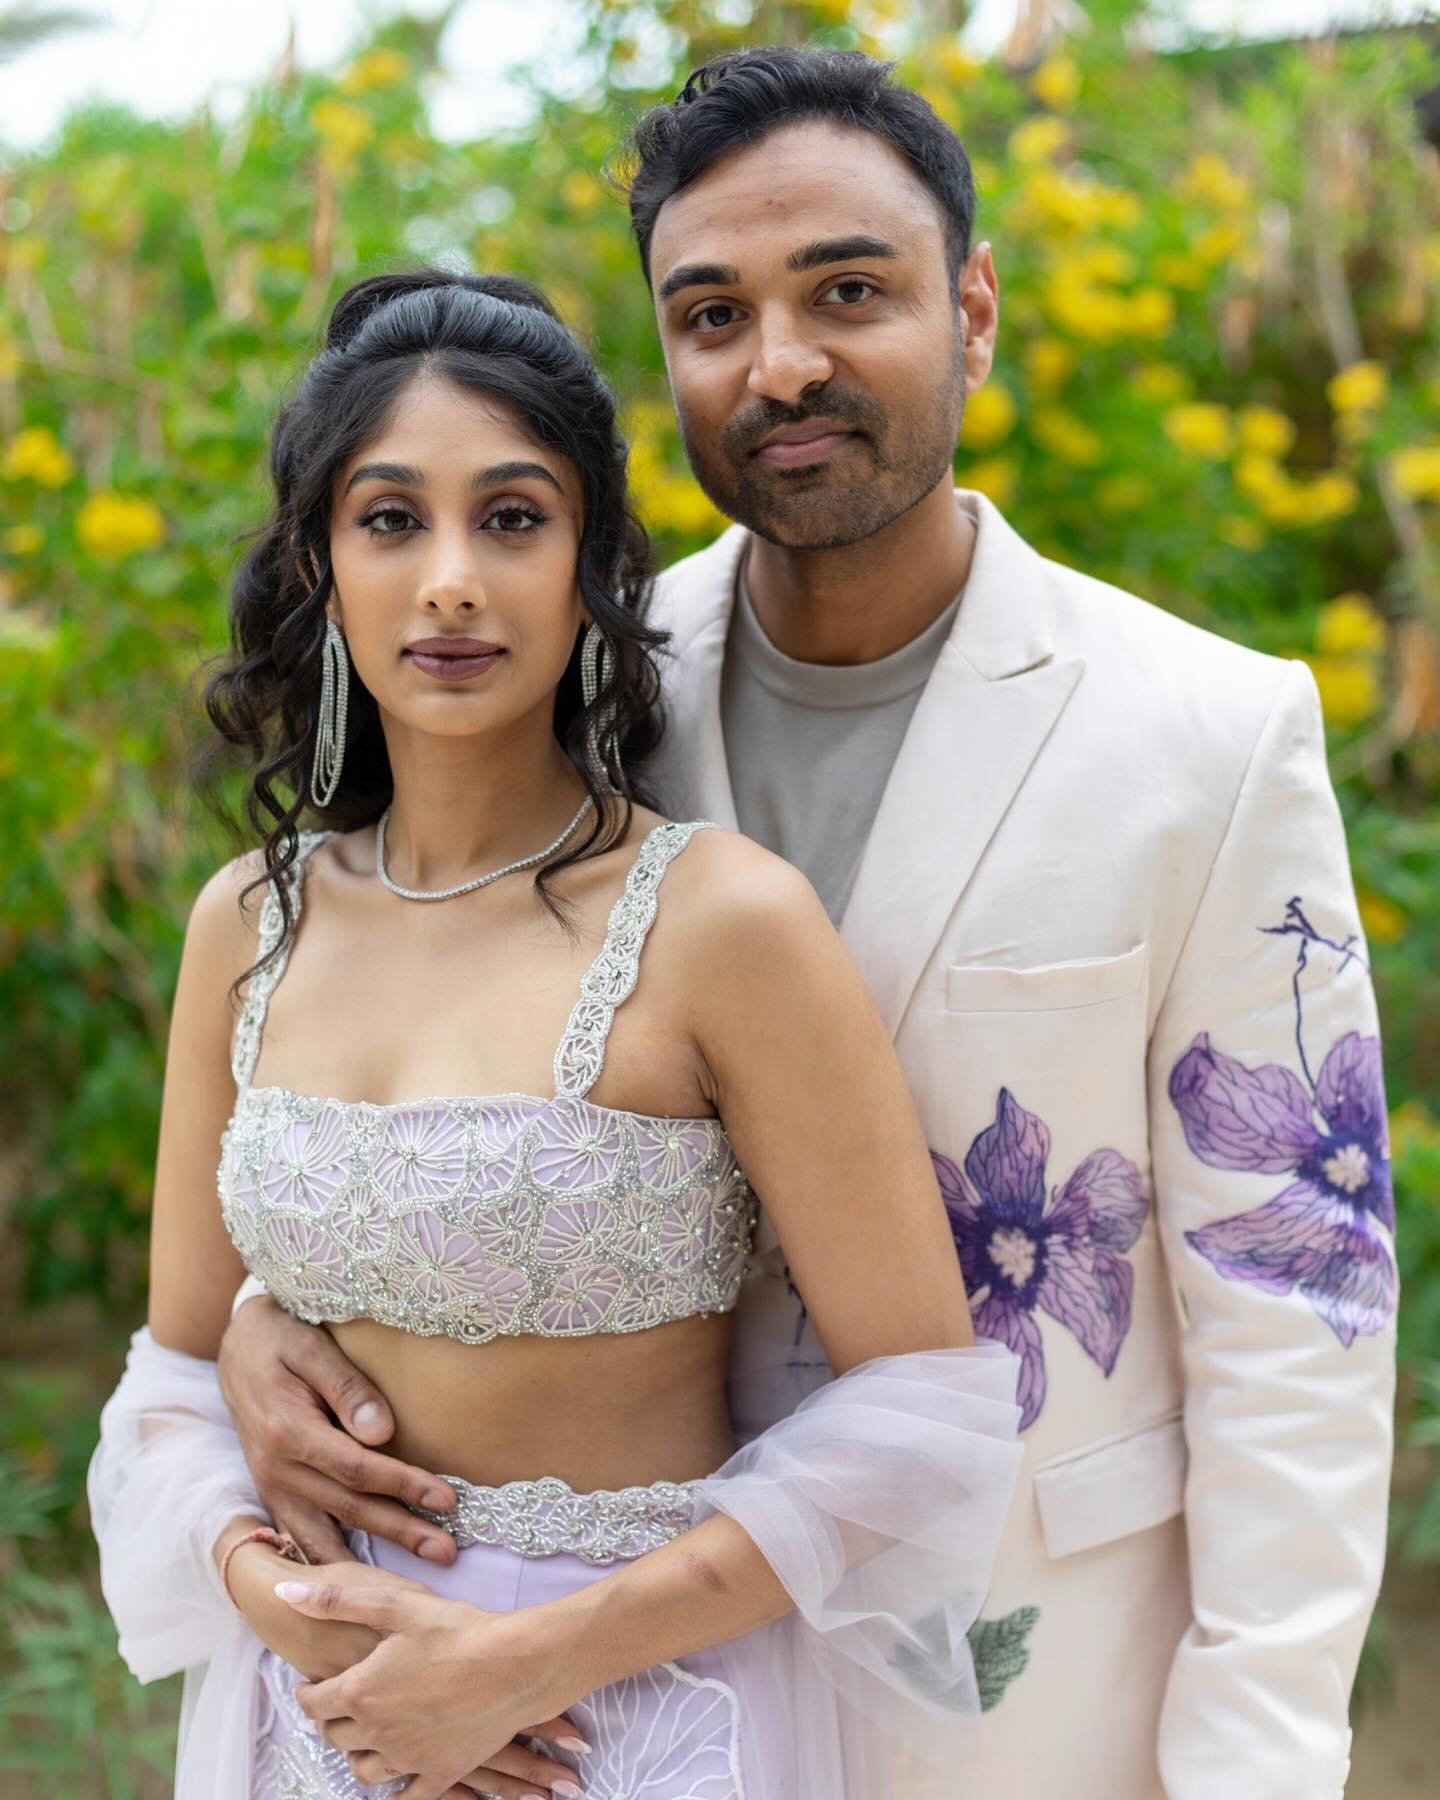 Neelam and Shaan&rsquo;s sangeet welcome dinner set the tone for a whole weekend of iconic style. She wore her favorite color in a delicate two piece set that played very nicely with his bespoke suit. I adore these two together and how they complimen